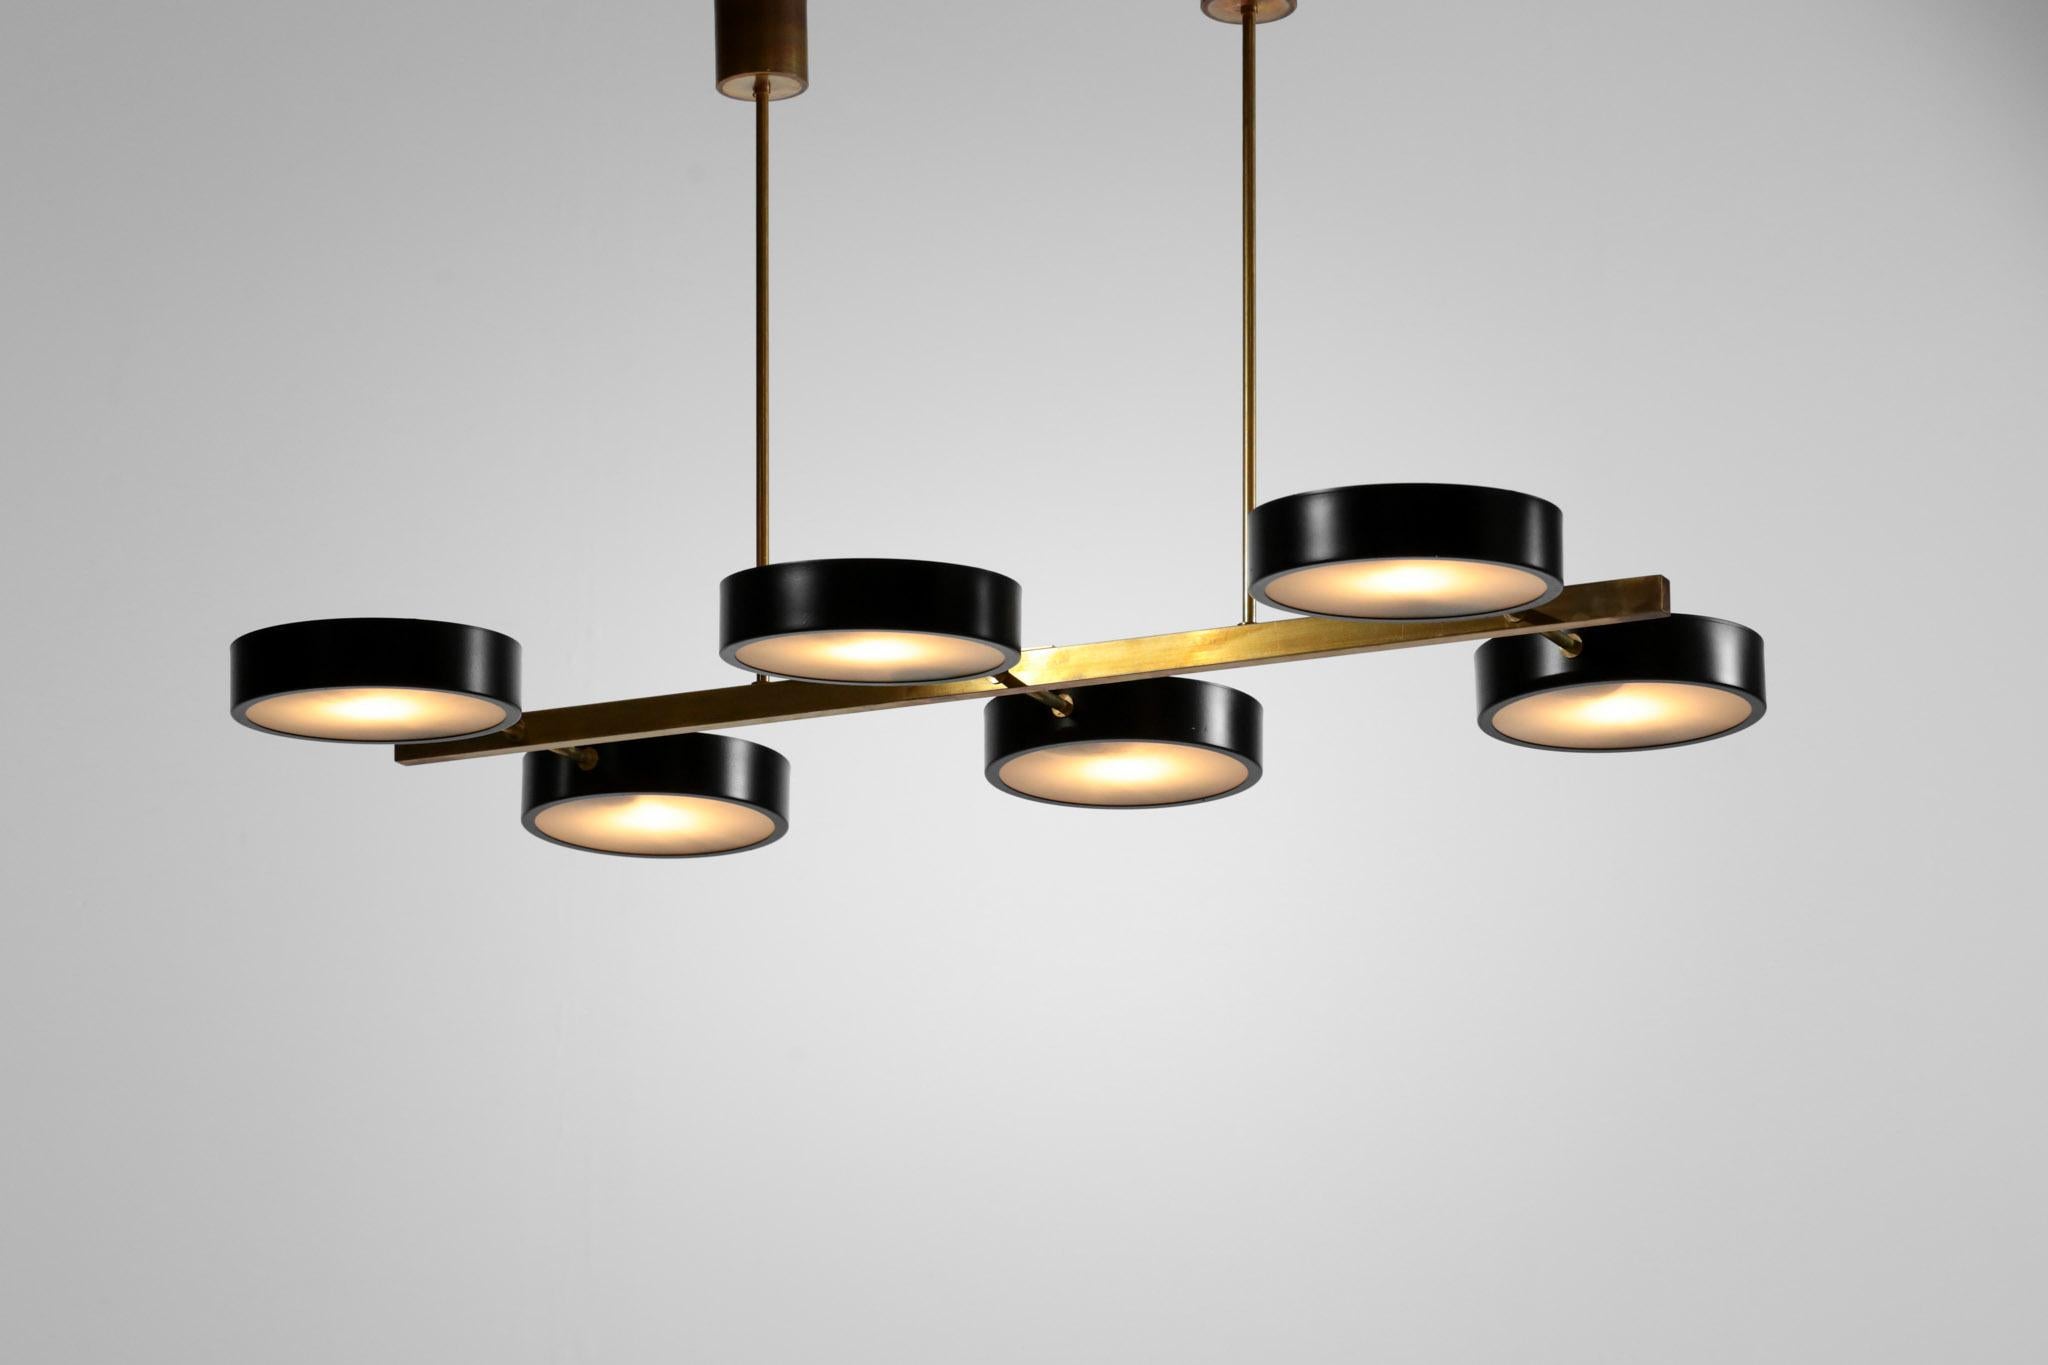 Handcrafted chandelier with 6 light in the style of Hans-Agne Jakobsson.
Structure in brass with black shade and glass on each light.
E14 bulb.